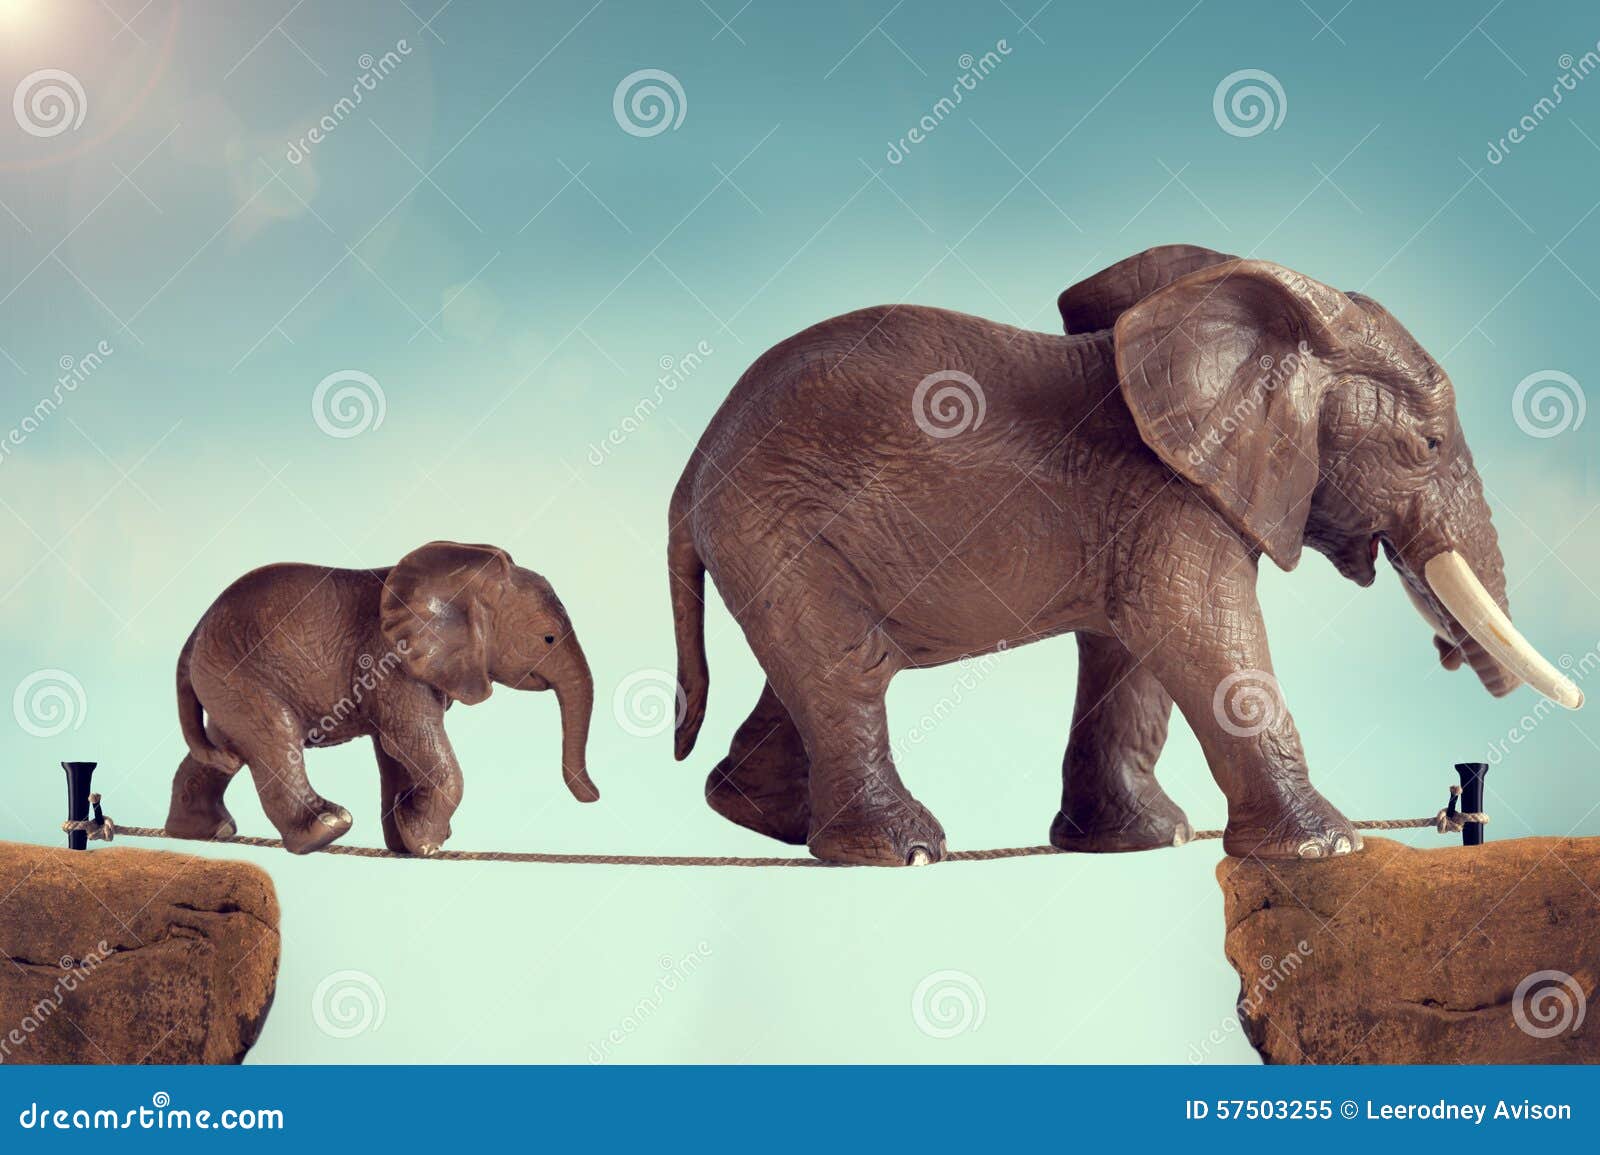 Mother And Baby Elephant On A Tightrope Stock Image Image Of Danger Animal